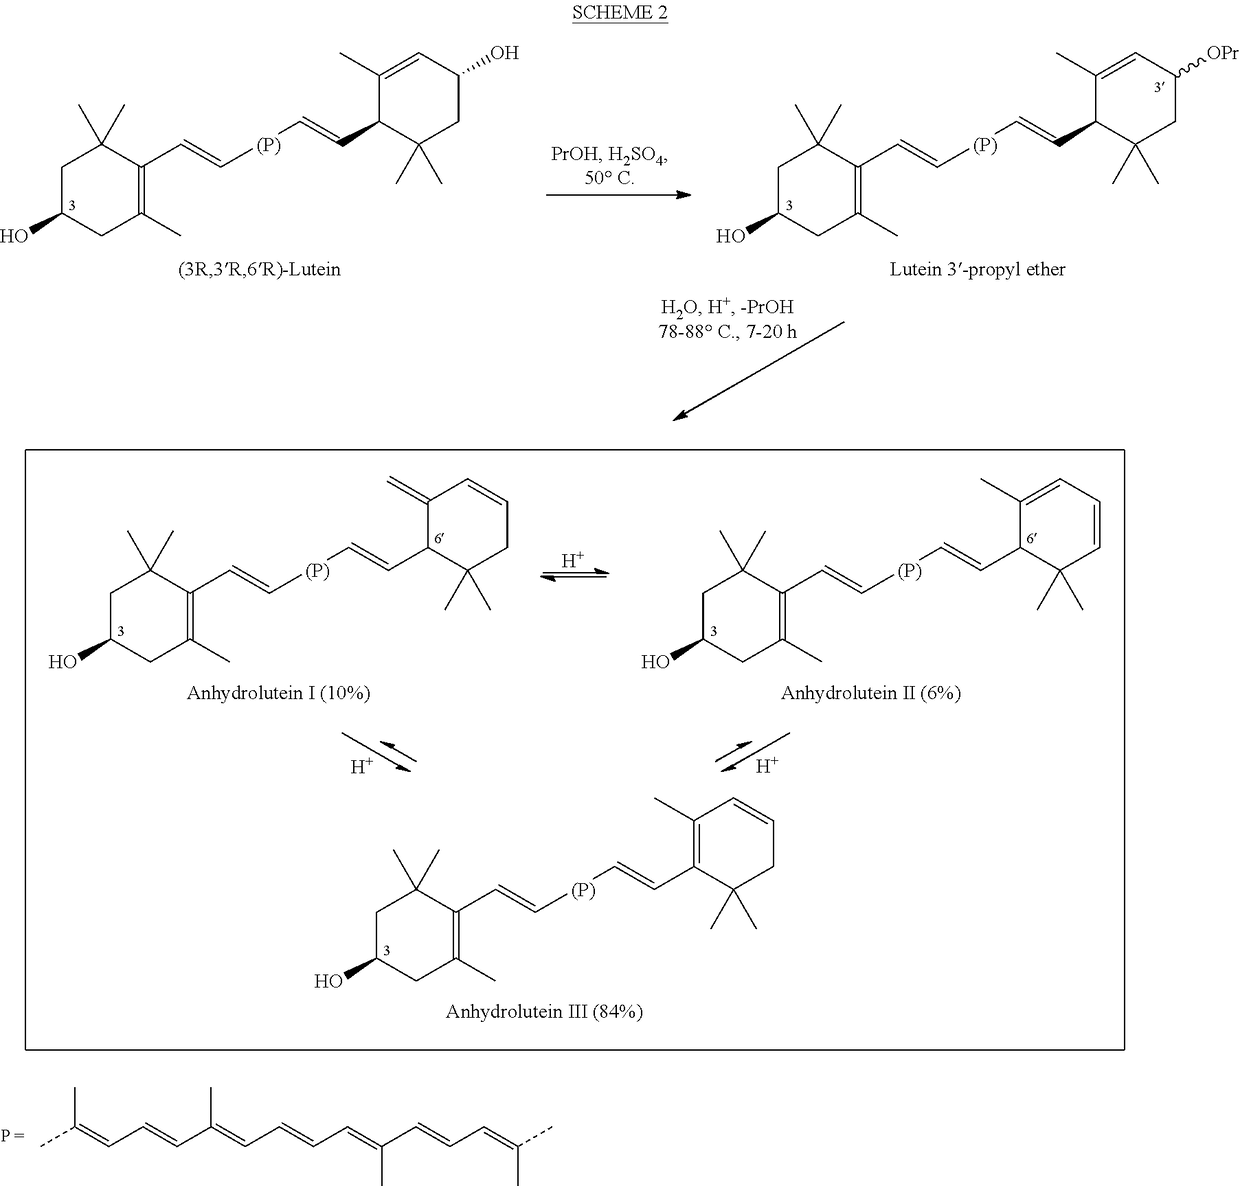 Process for a direct one-pot transformation of lutein to β-cryptoxanthin via its acetate ester